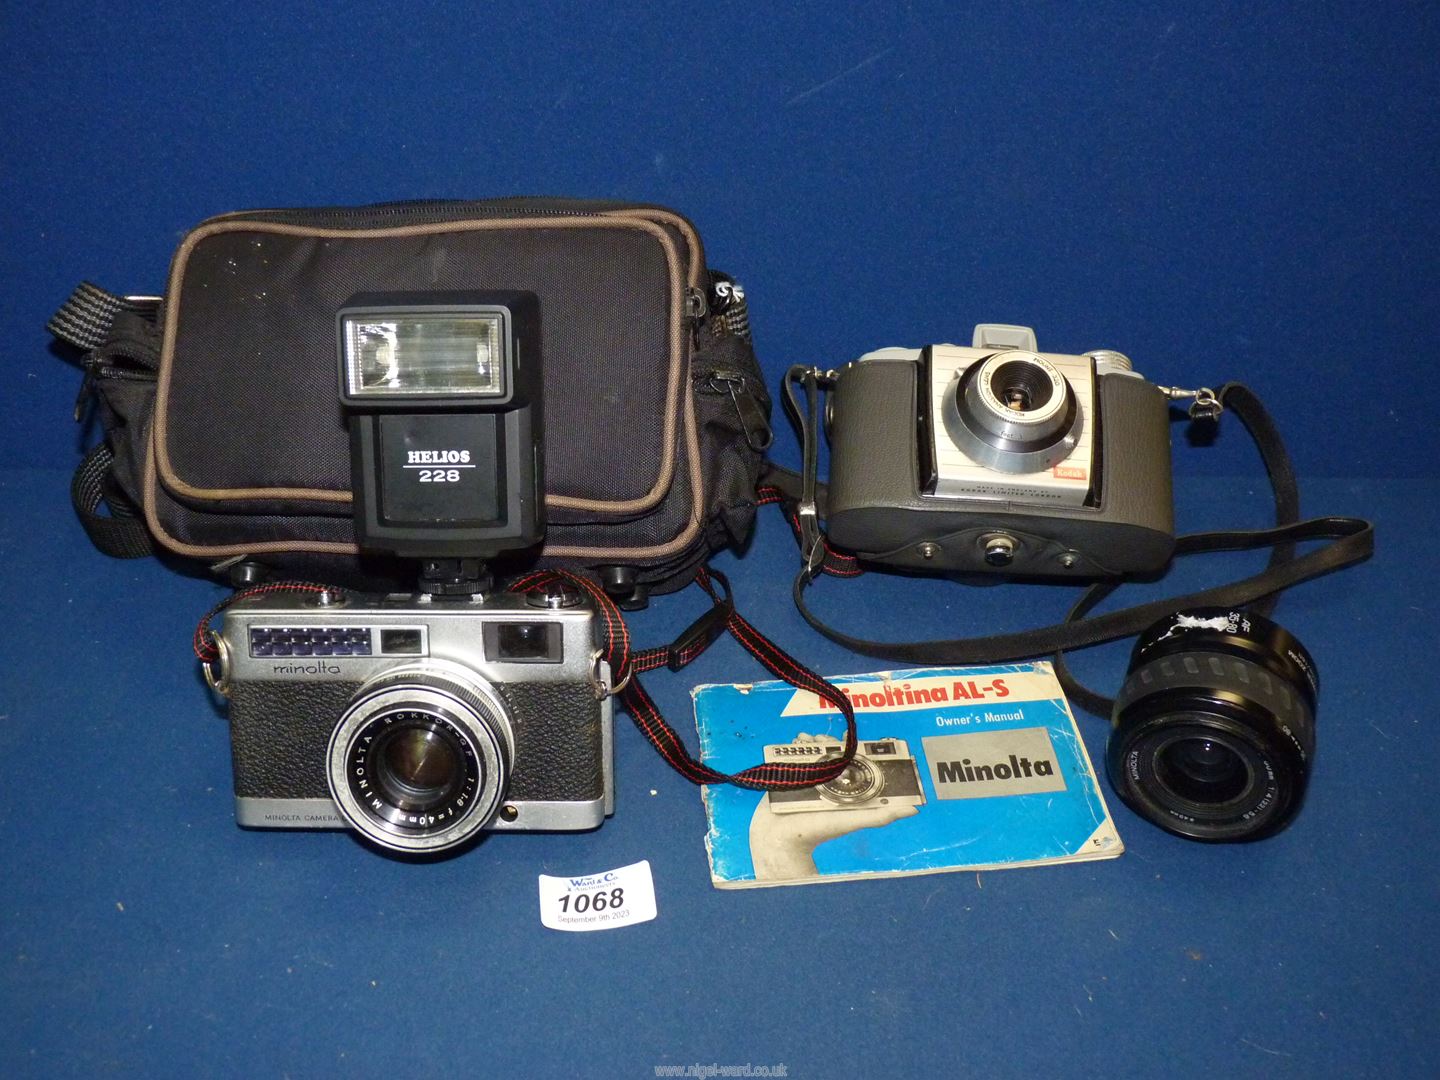 A Japanese Minolta Rokkor A1-S camera with Helios flash and Minolta power zoom lens all in carrying